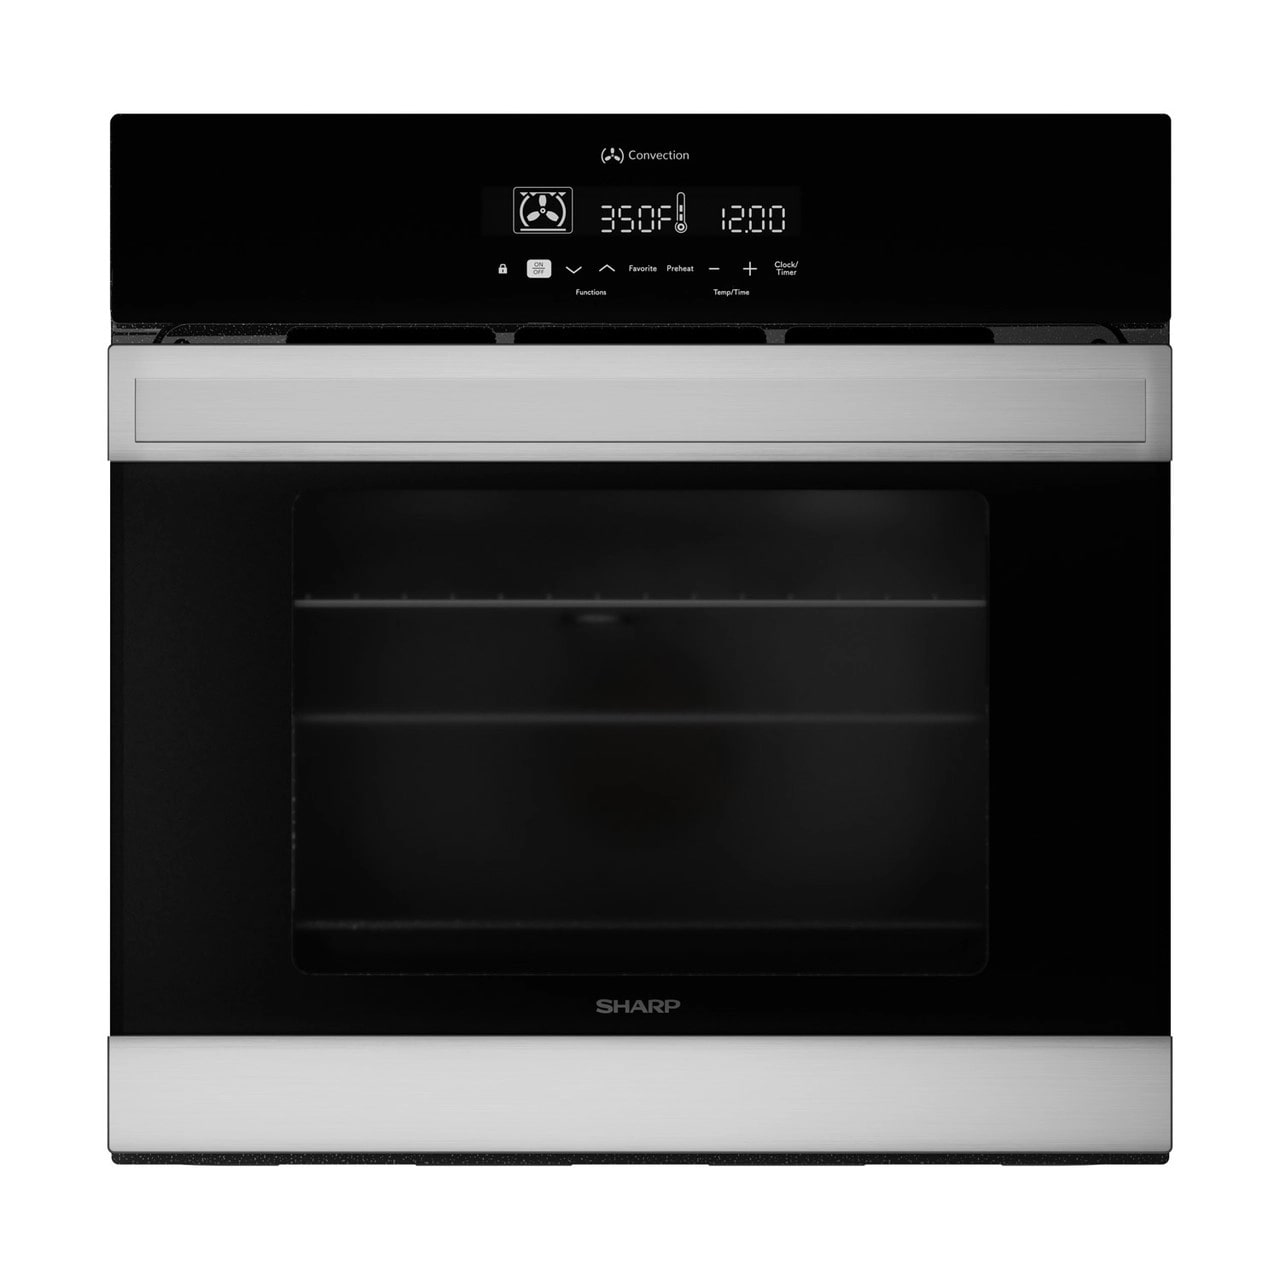 Sharp - 32.2 cu. ft Single Wall Oven in Stainless - SWA2450GS